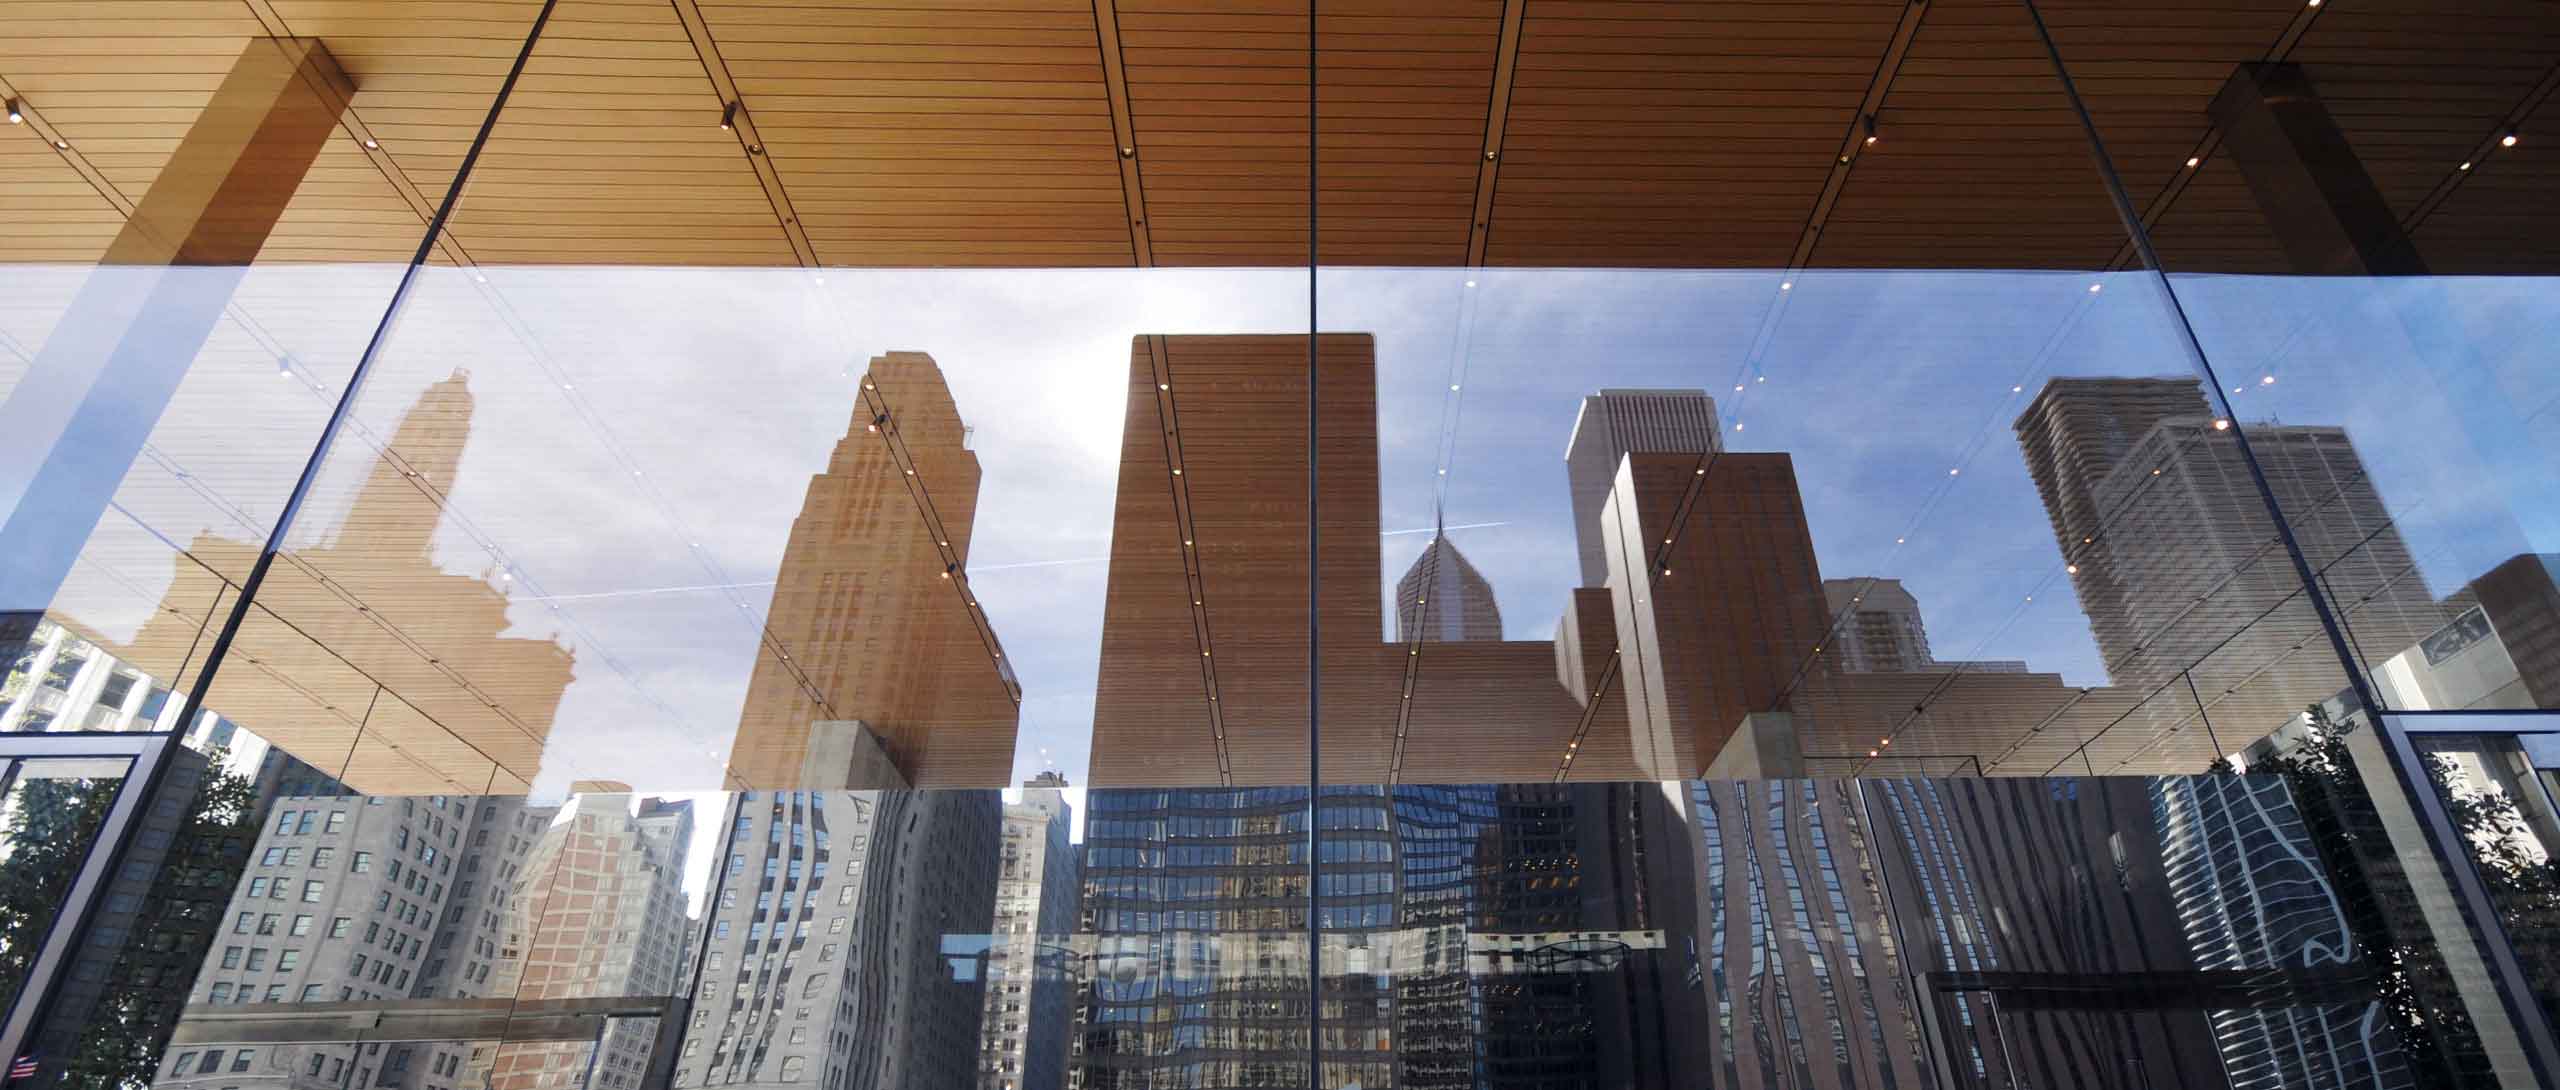 New Apple Store made our of glass on Michigan Avenue - Chicago, IL Stock  Photo - Alamy